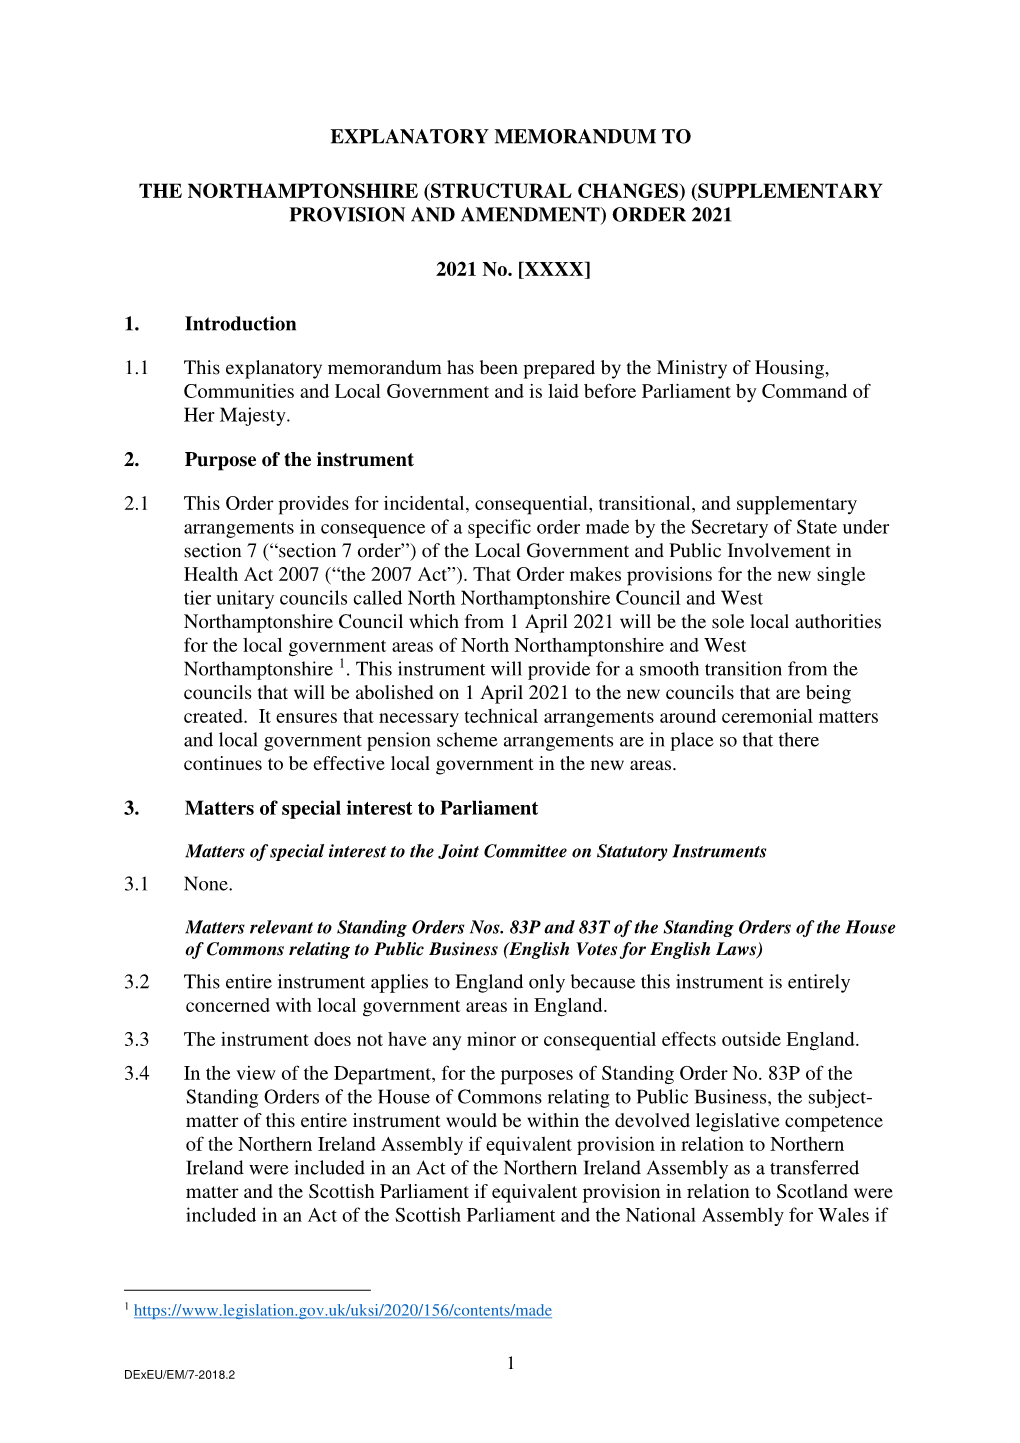 The Northamptonshire (Structural Changes) (Supplementary Provision and Amendment) Order 2021